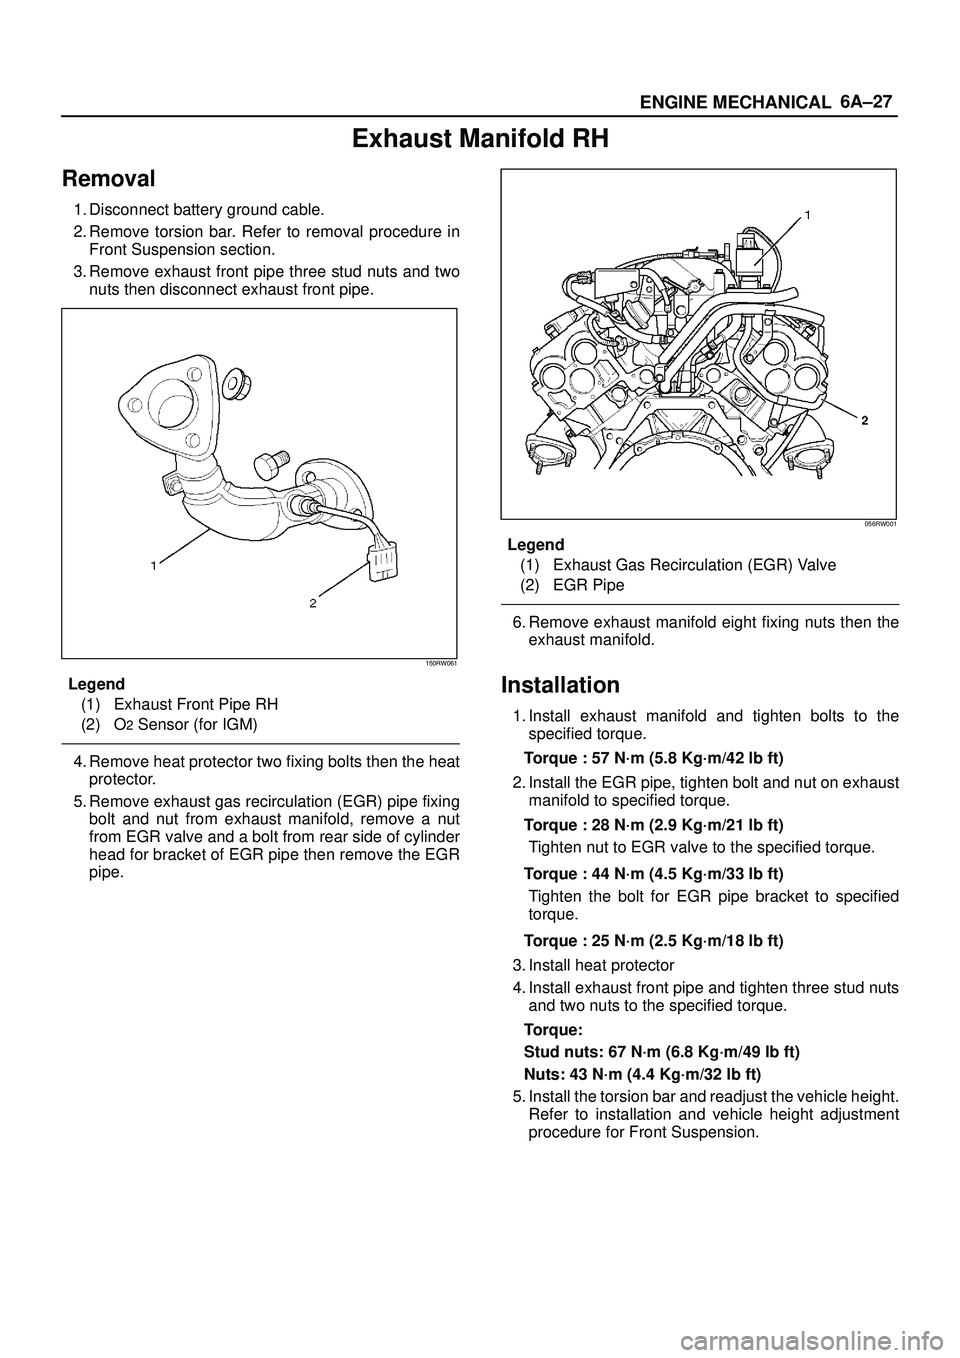 ISUZU TROOPER 1998  Service Repair Manual 6A±27
ENGINE MECHANICAL
Exhaust Manifold RH
Removal
1. Disconnect battery ground cable.
2. Remove torsion bar. Refer to removal procedure in
Front Suspension section.
3. Remove exhaust front pipe thr